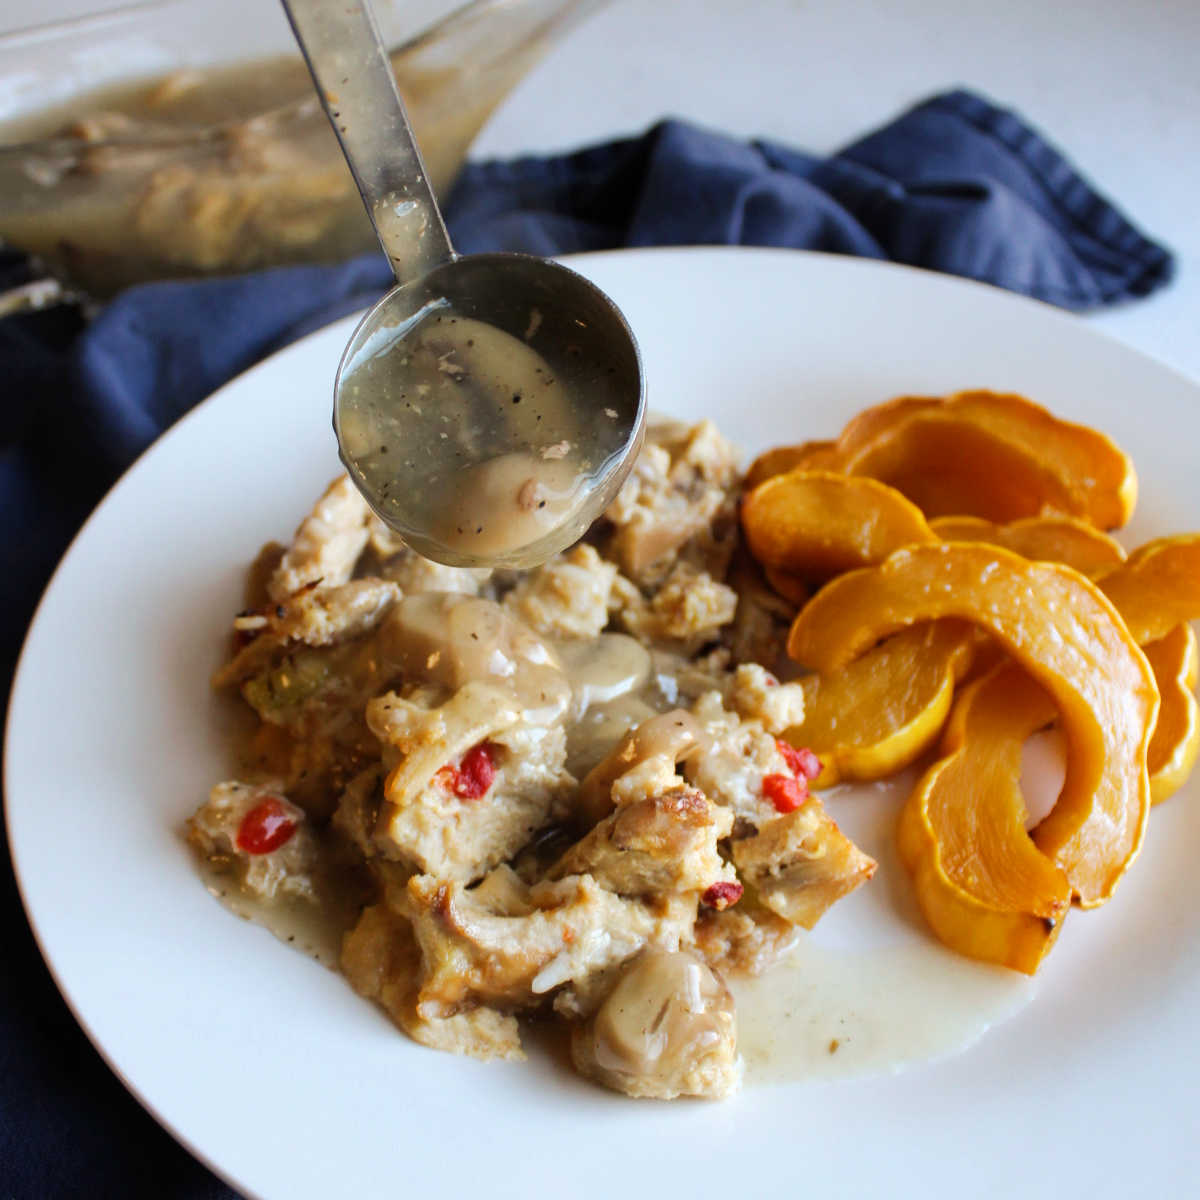 Spooning mushroom gravy over turkey and rice casserole on plate with roasted squash.